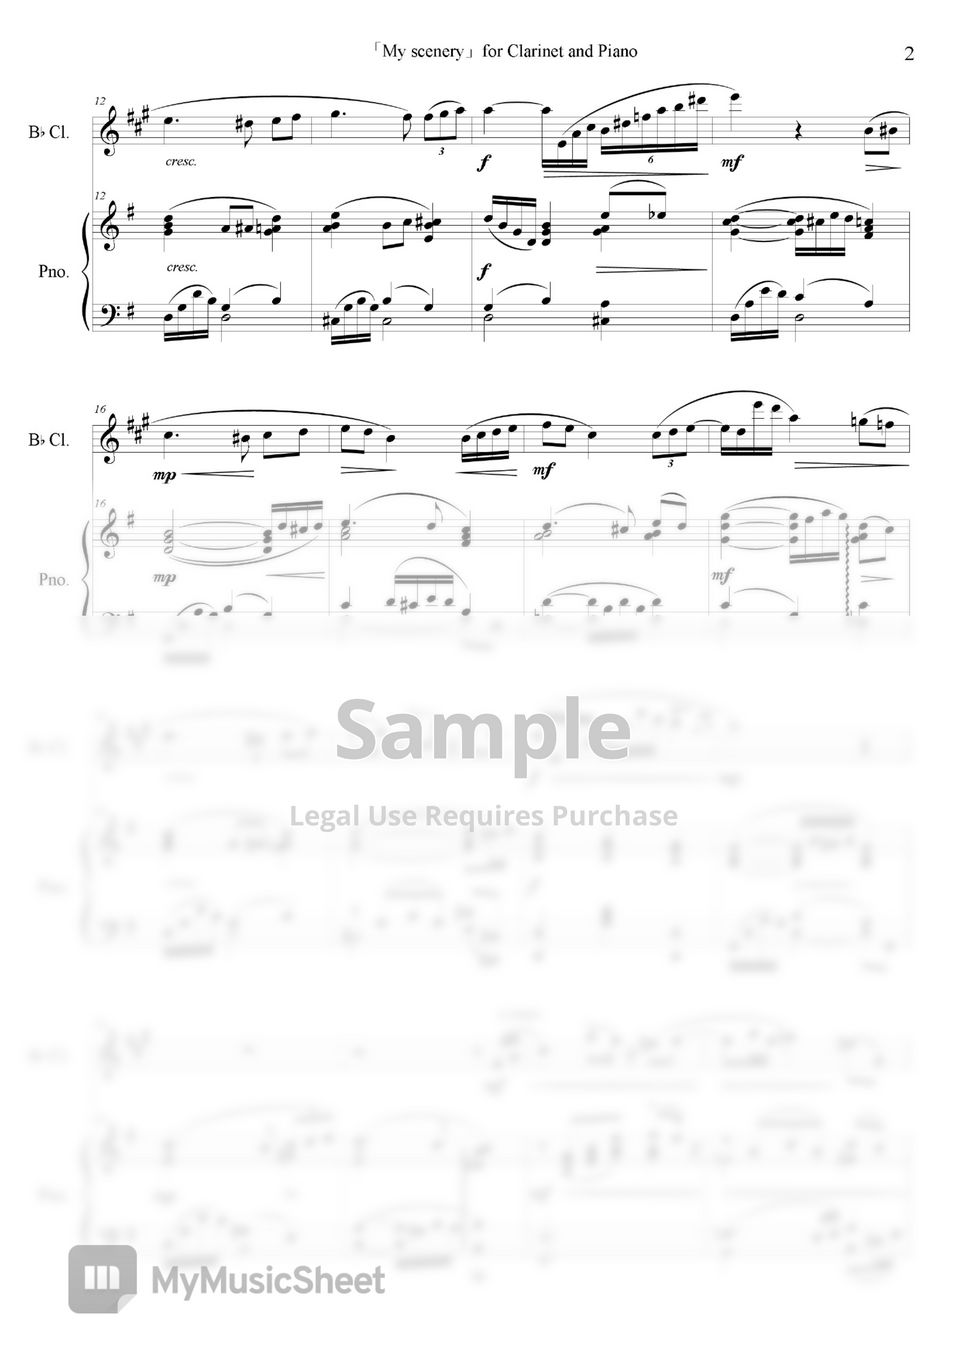 Youngchul Jang - 「My Scenery」 for Clarinet and Piano (Clarinet Piano duet) by Youngchul Jang